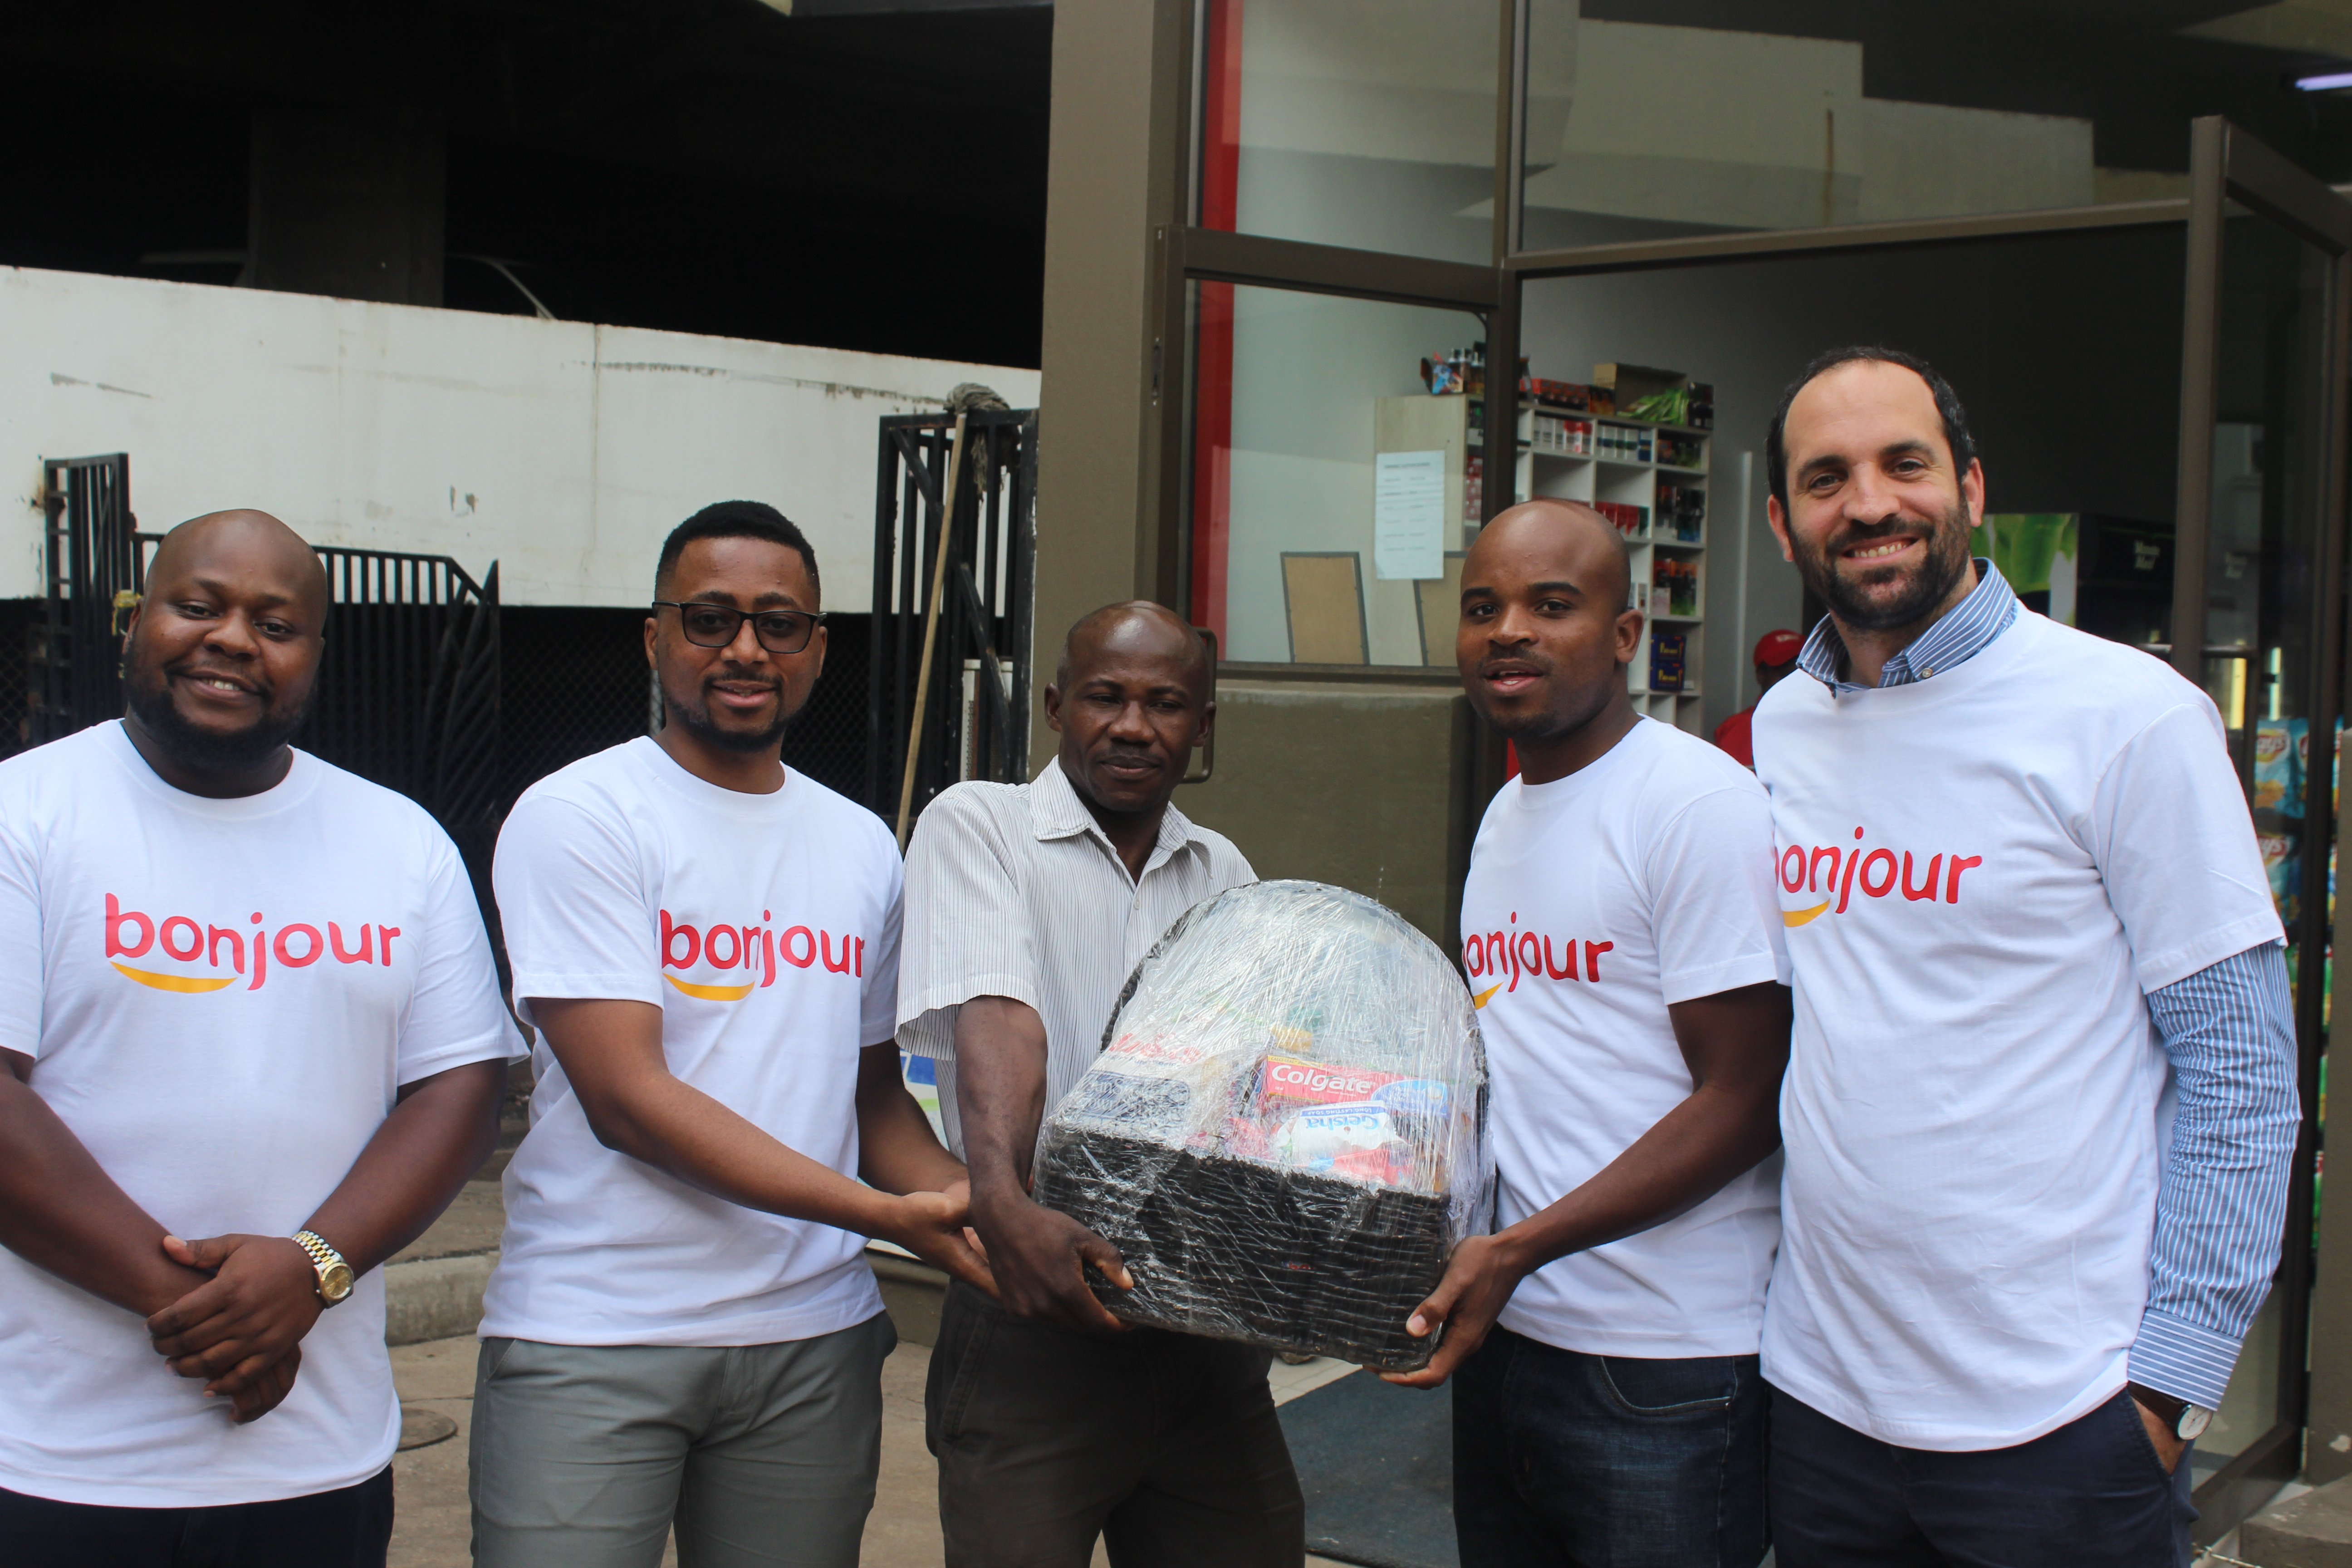 In December 2019, Total Zimbabwe had a promotion running which took place in selected Bonjour shops nationwide. The promotion was called the FESTIVE BONANZA and had awesome prizes up for grabs
